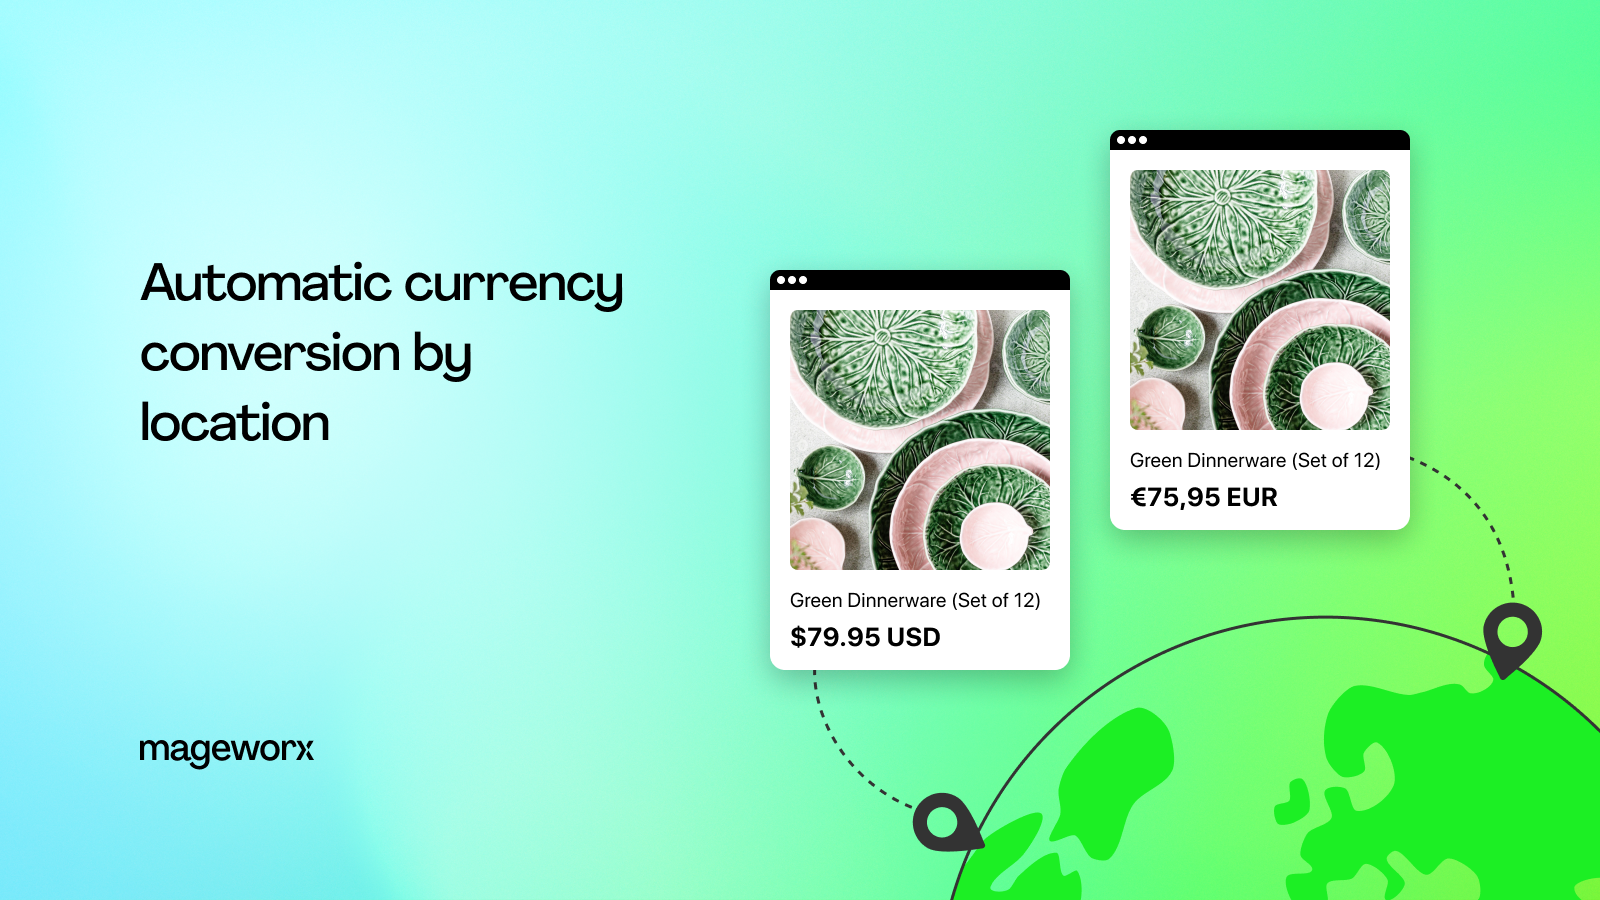 Automatic currency conversion by location